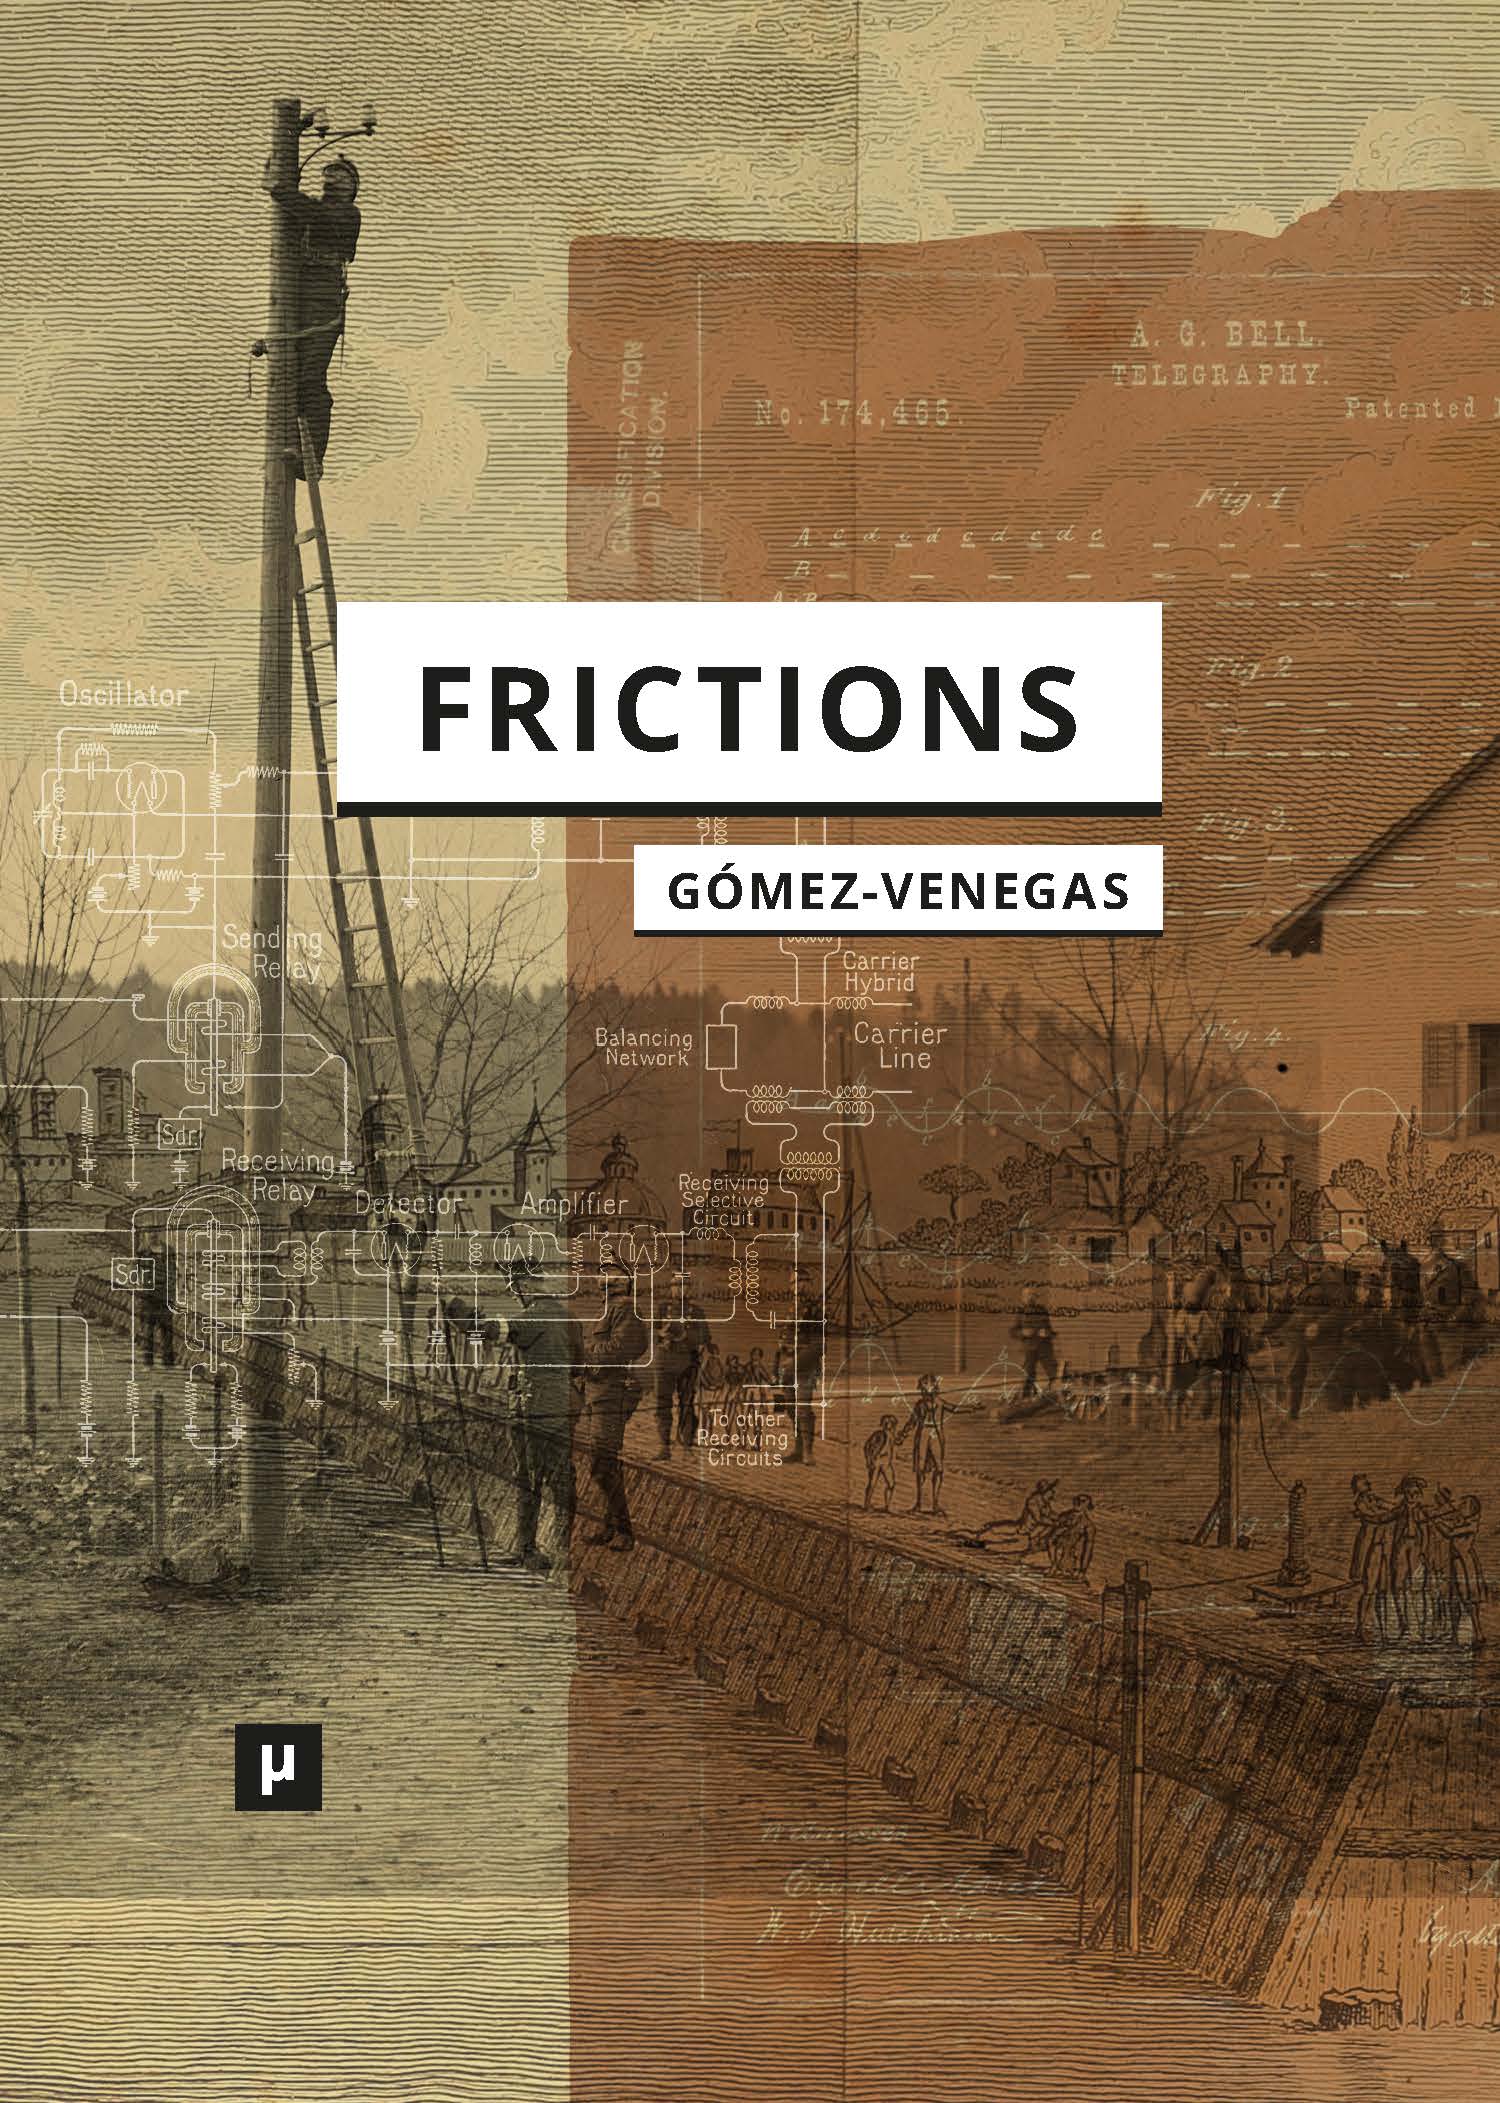 Frictions: Inquiries into Cybernetic Thinking and Its Attempts towards Mate[real]ization (meson press eG, 2023)